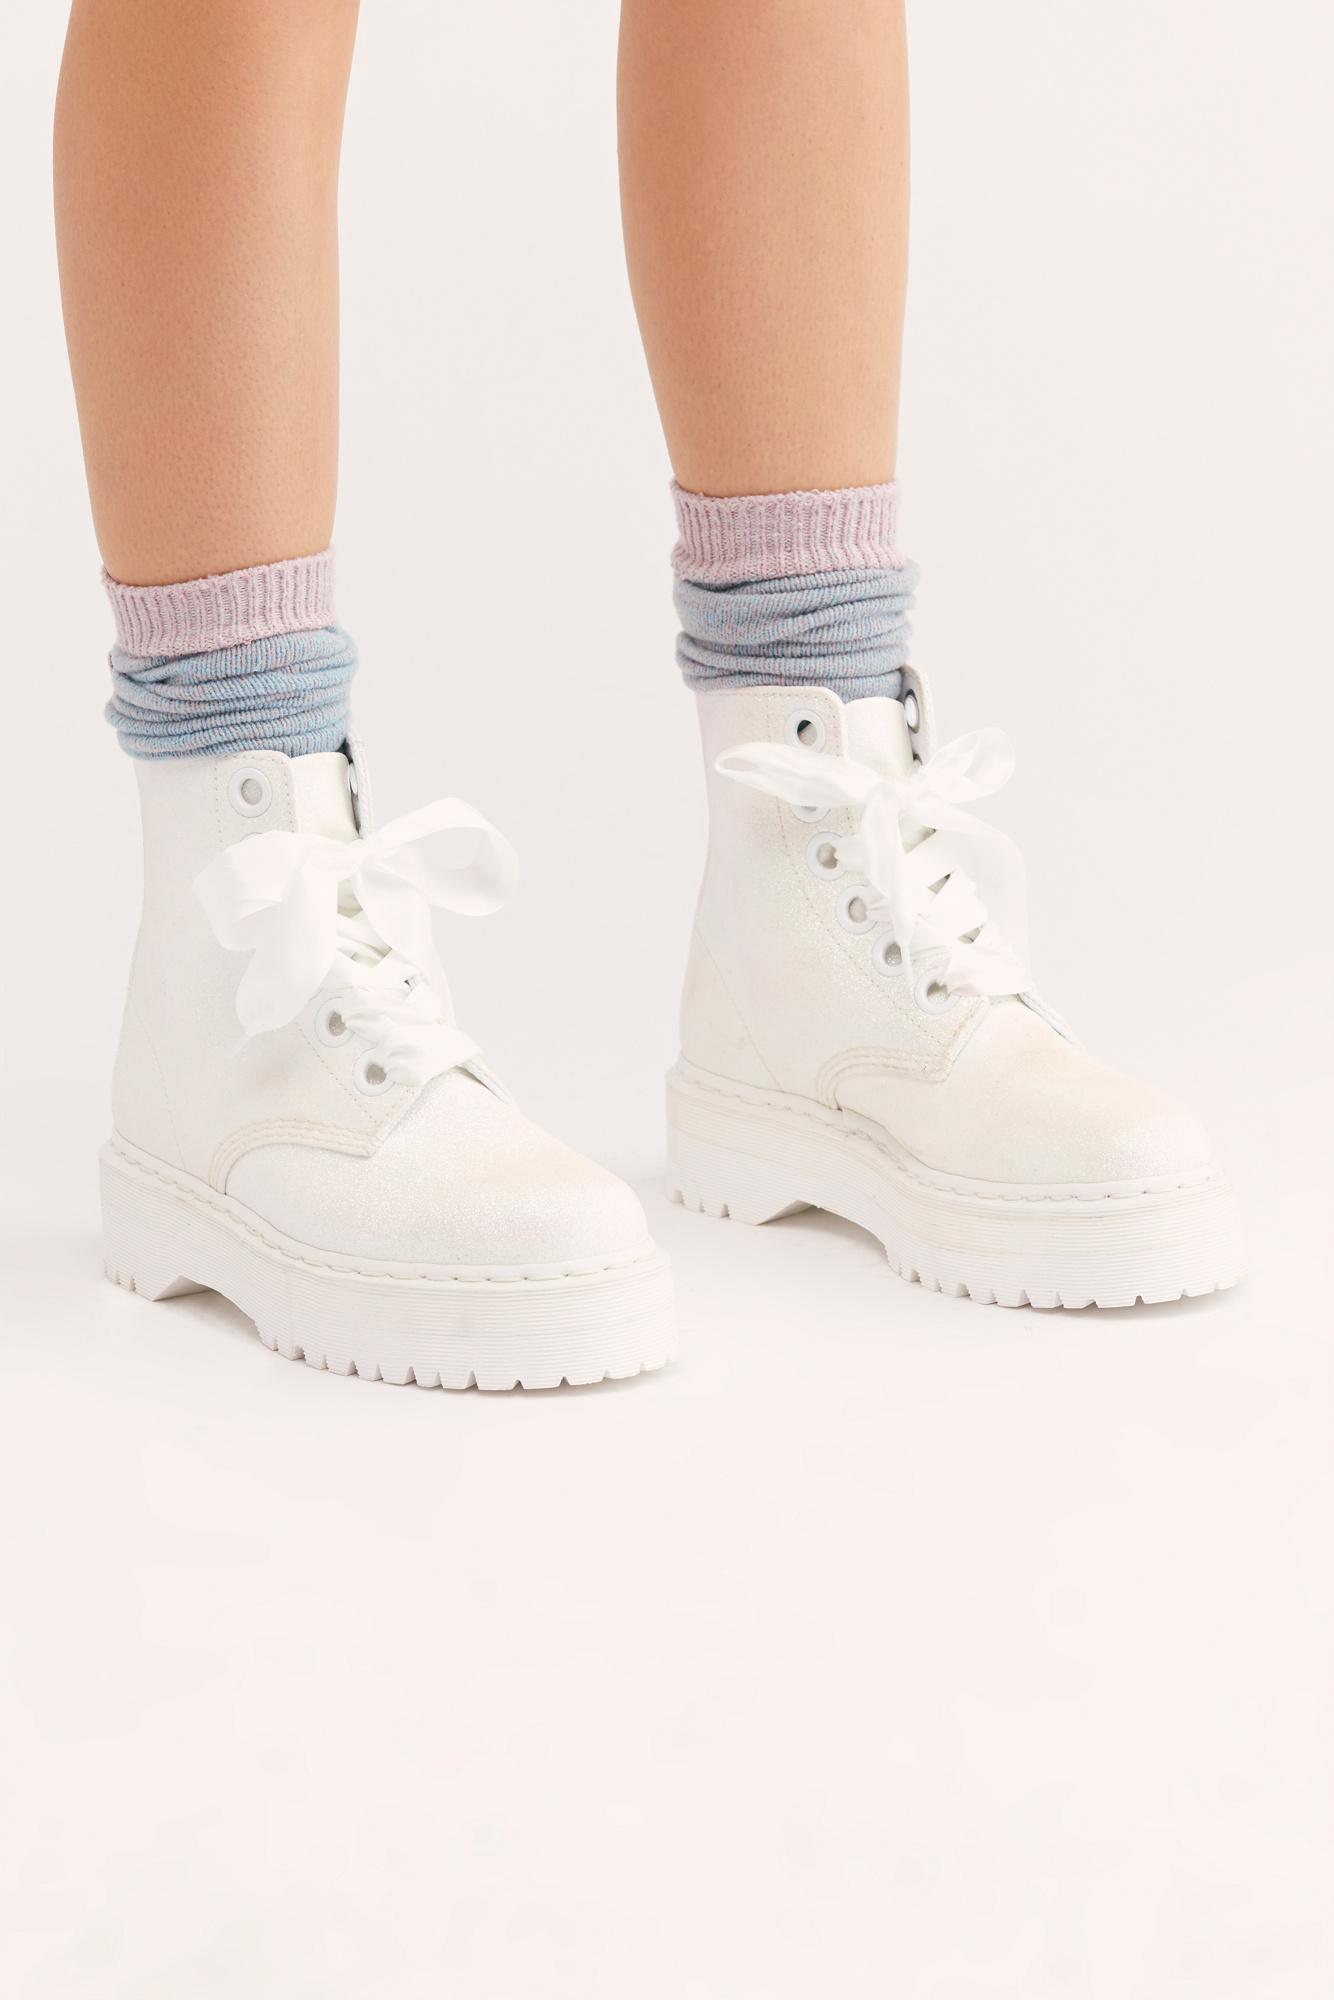 Free People Dr. Martens Molly Glitter 6 Eye Boots in White | Lyst